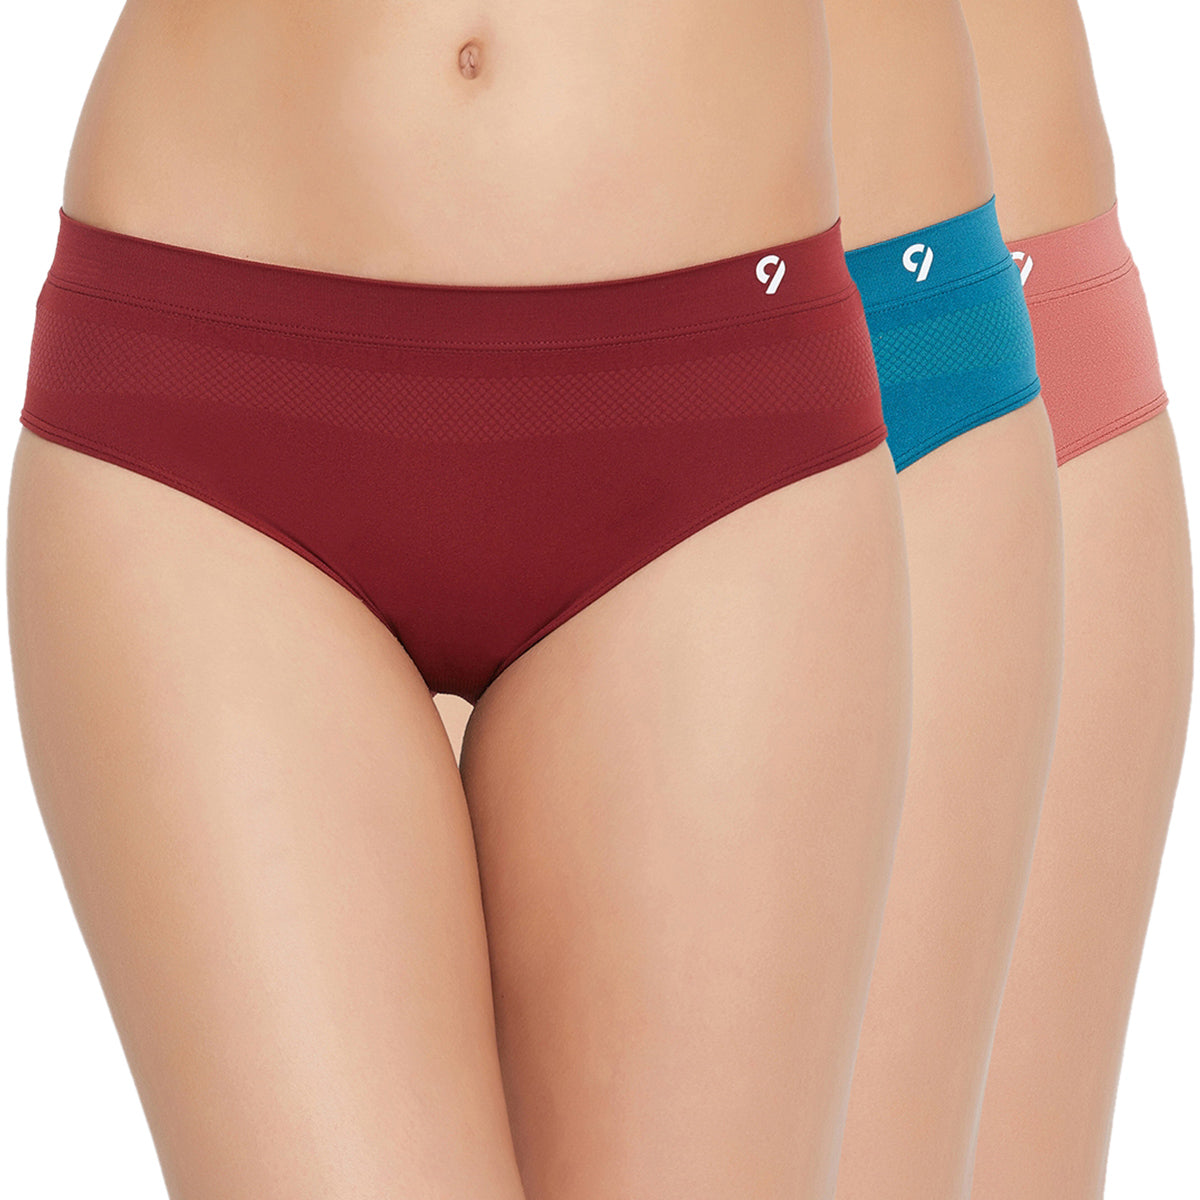 C9 AIRWEAR Mid Rise Panty Combo For Women (5 Packs)